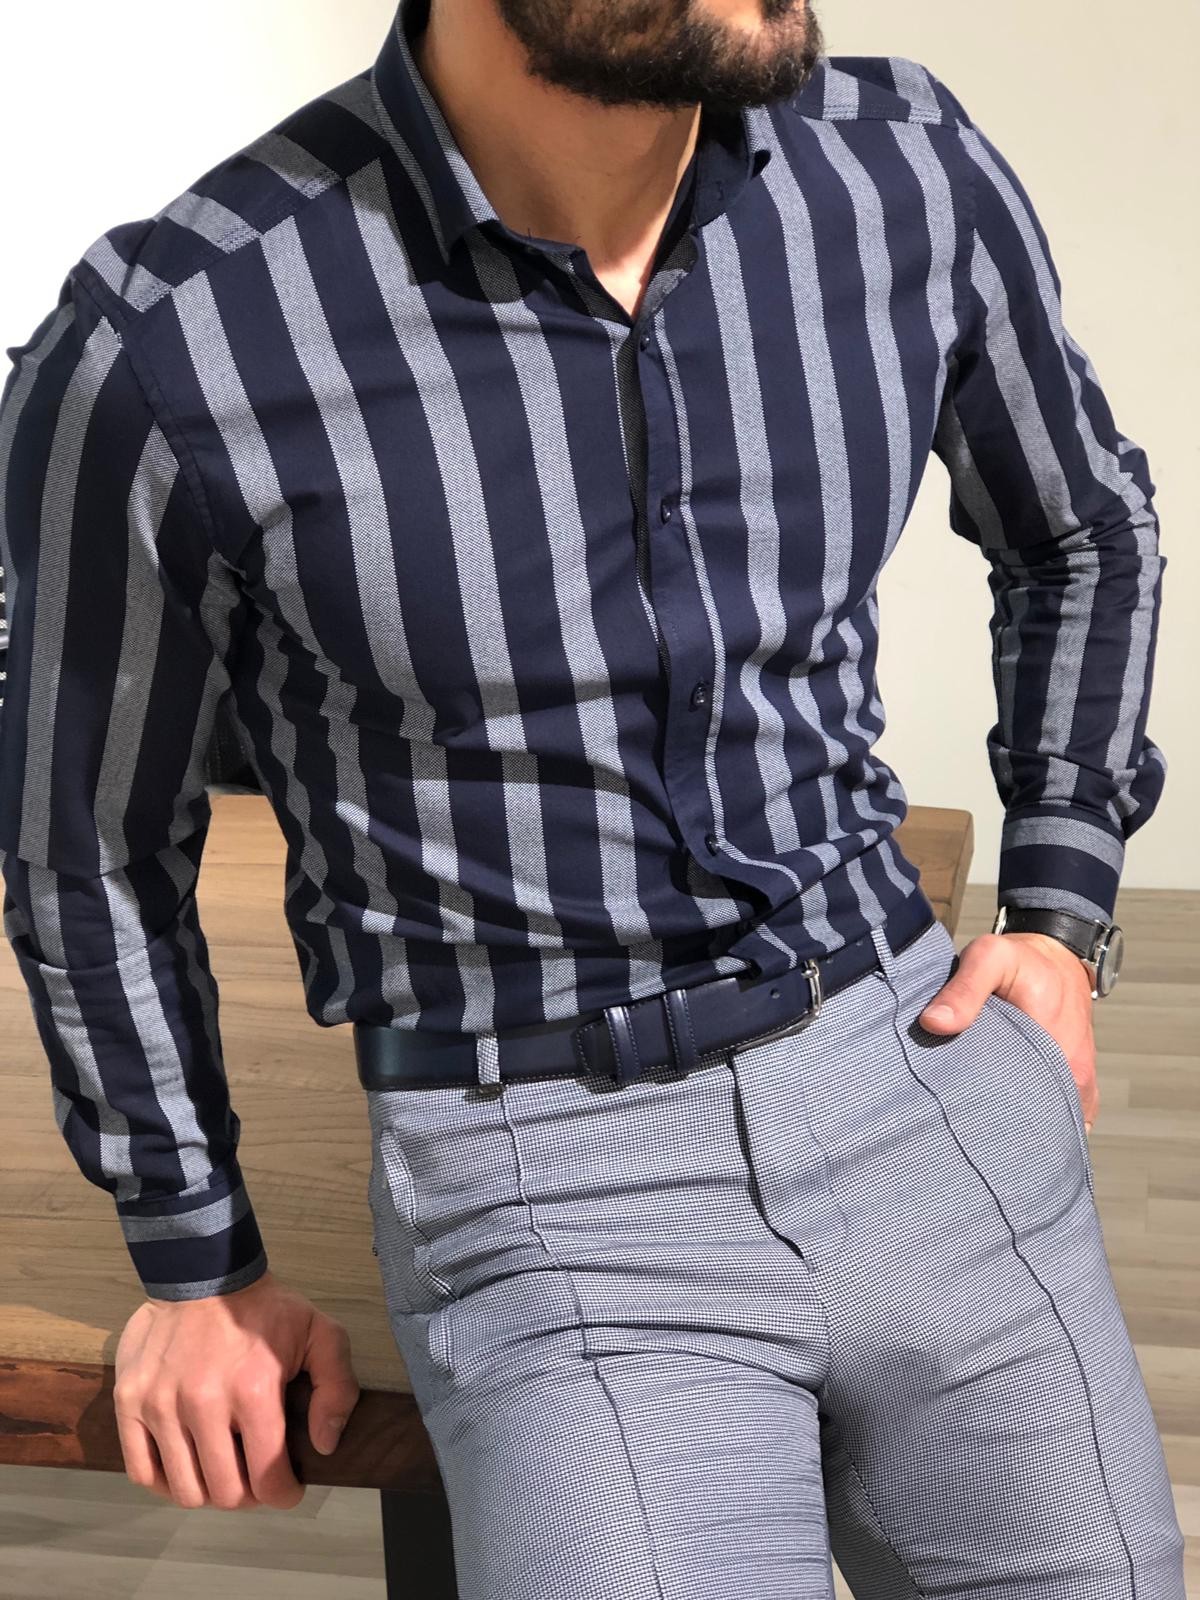 bowl have fun Volcanic Buy Navy Blue Slim Fit Striped Shirt by Gentwith.com with Free Shipping